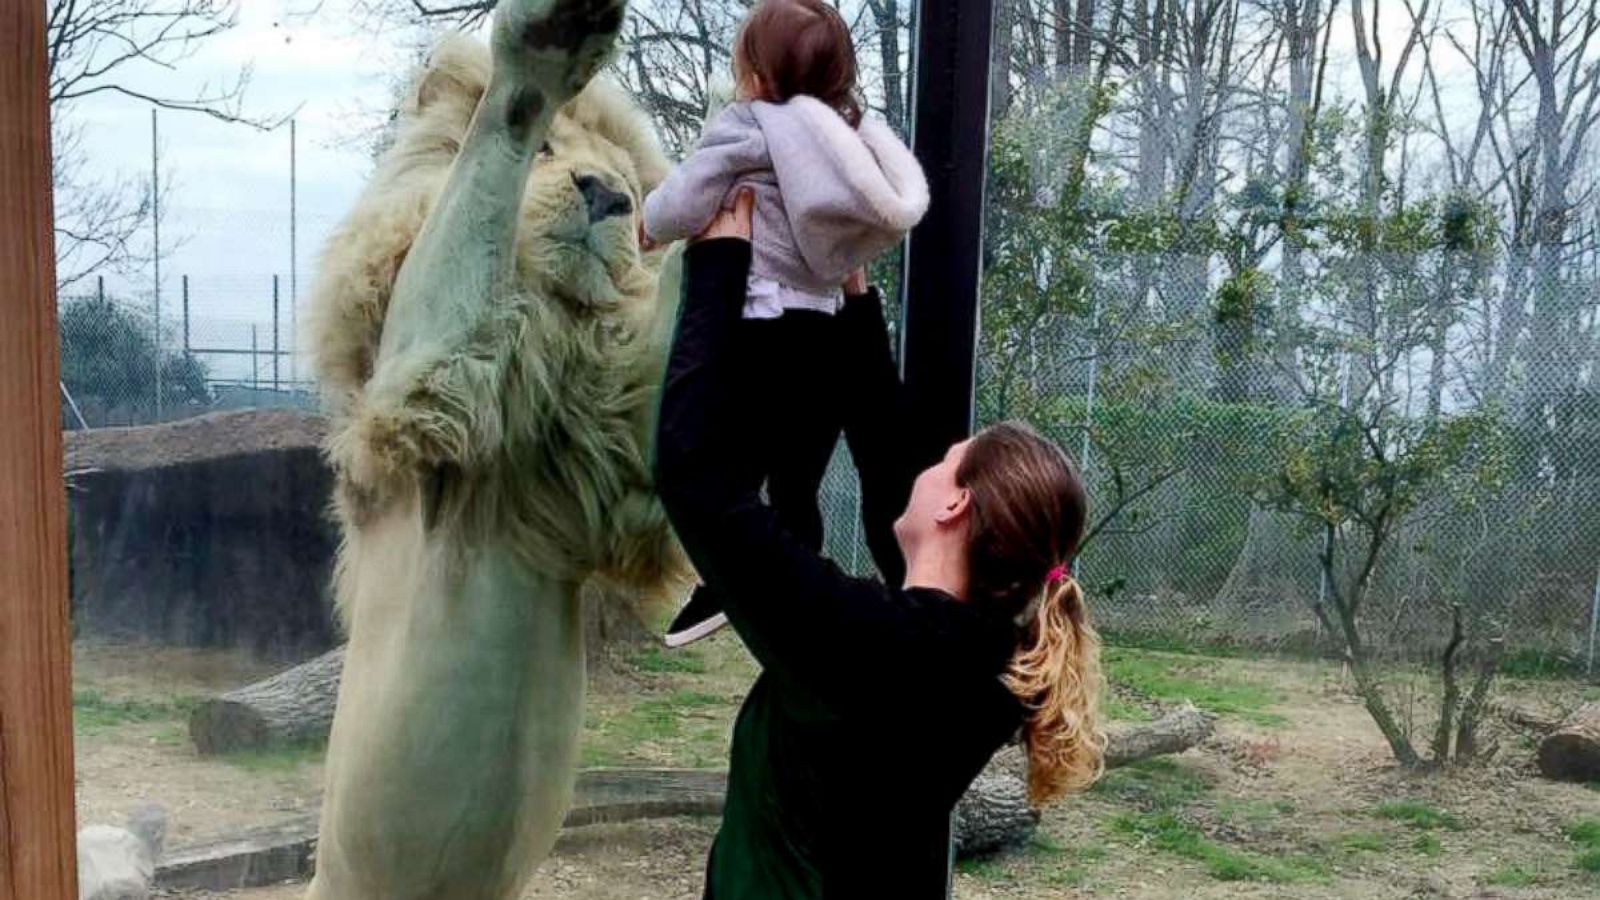 PHOTO: When 14-month-old Josie Finley pressed up to a glass enclosure at Tiger World in Rockwell, N.C., an endangered Timbavati White Lion pawed and licked the glass.